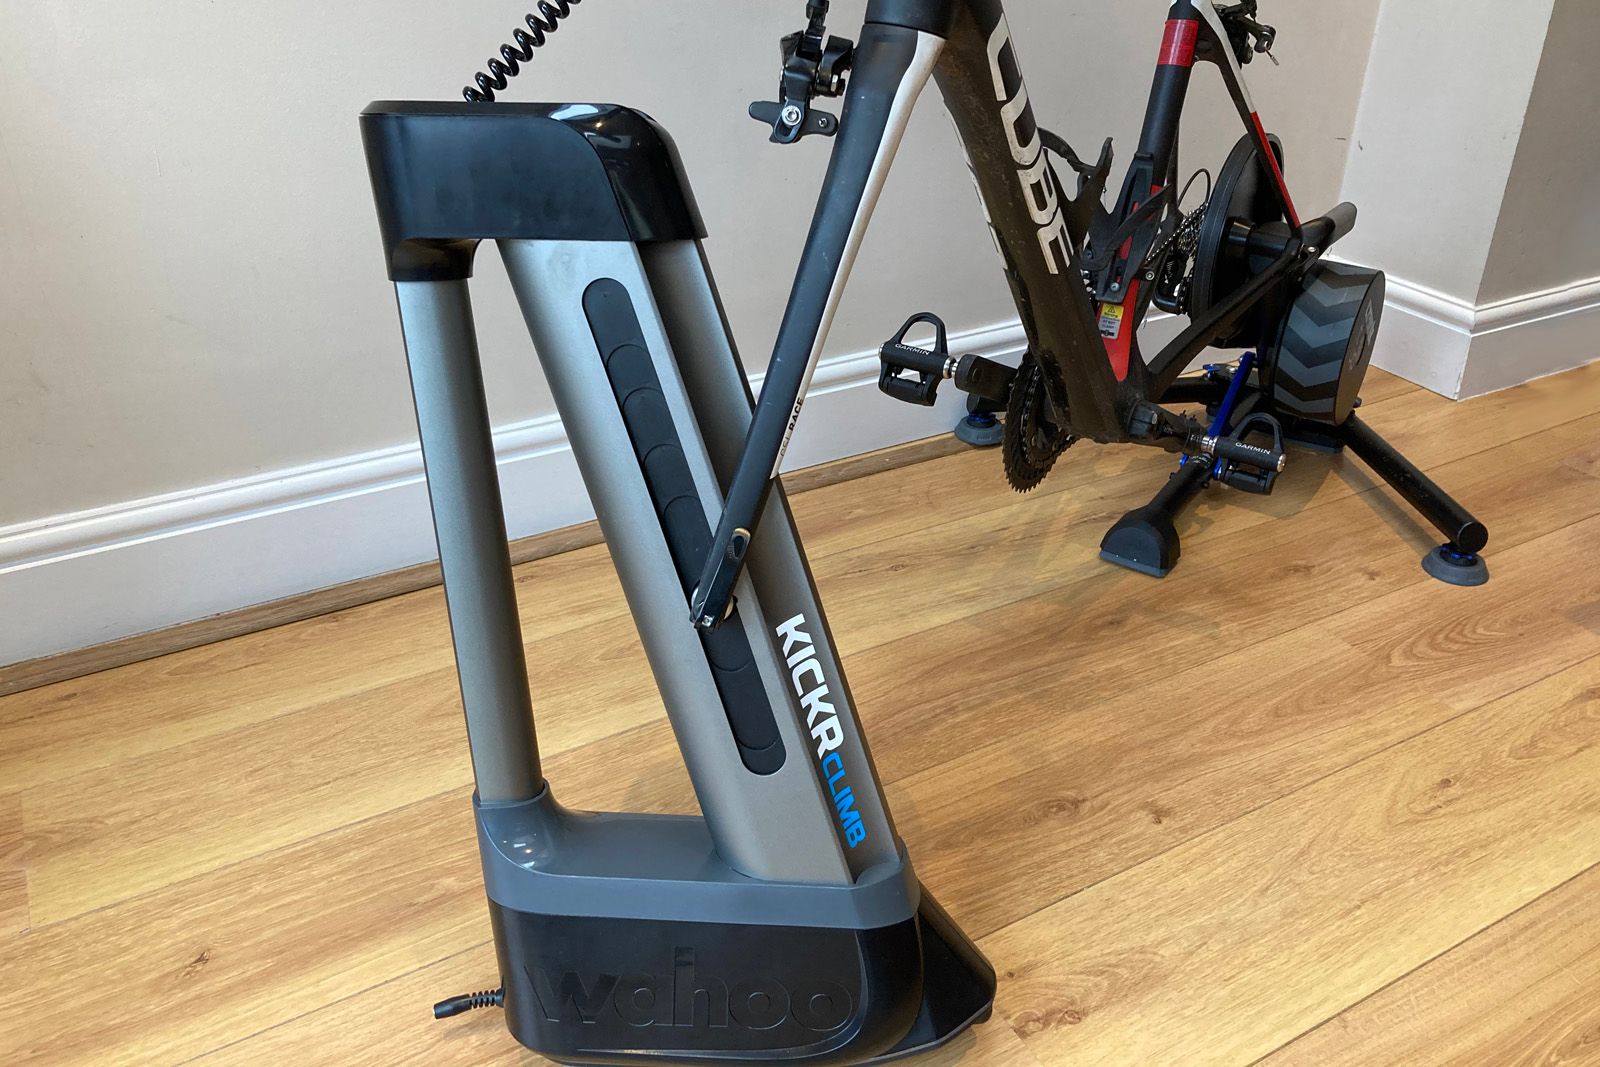 Wahoo Kickr Climb review: Taking indoor training up a level